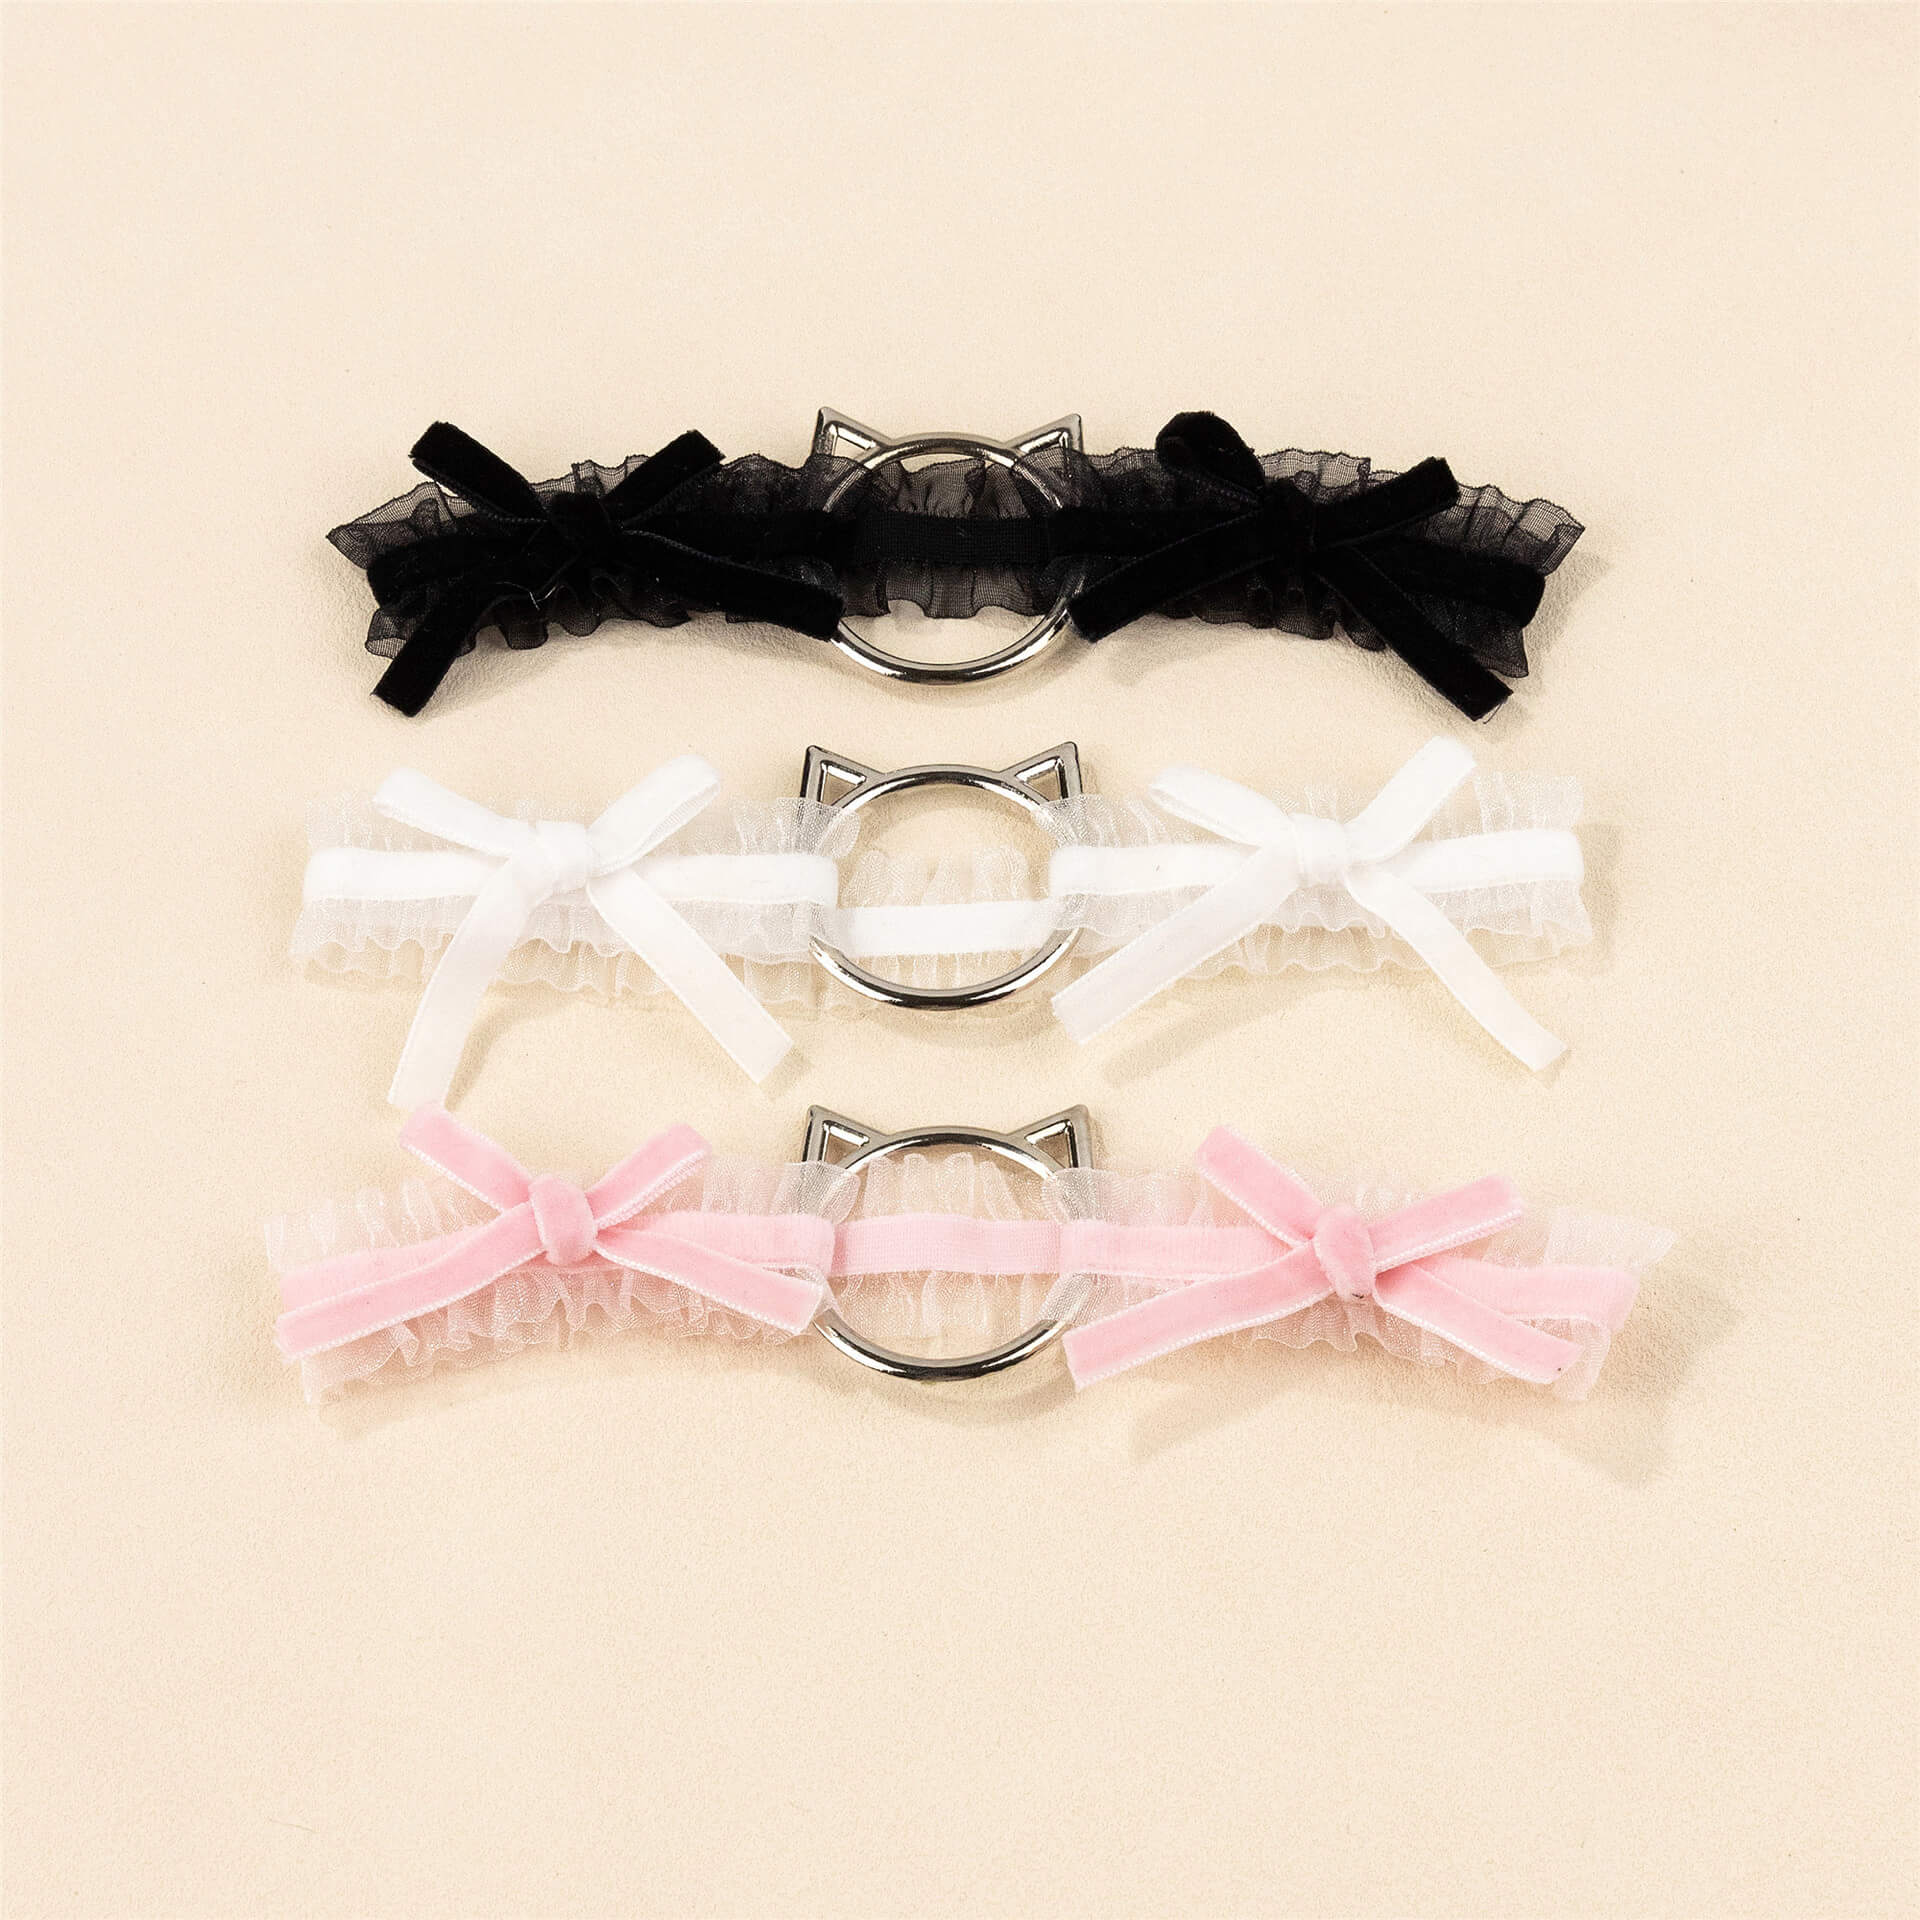 Black/White/Pink Lace Cat Garter With Bow - Femboy Fashion